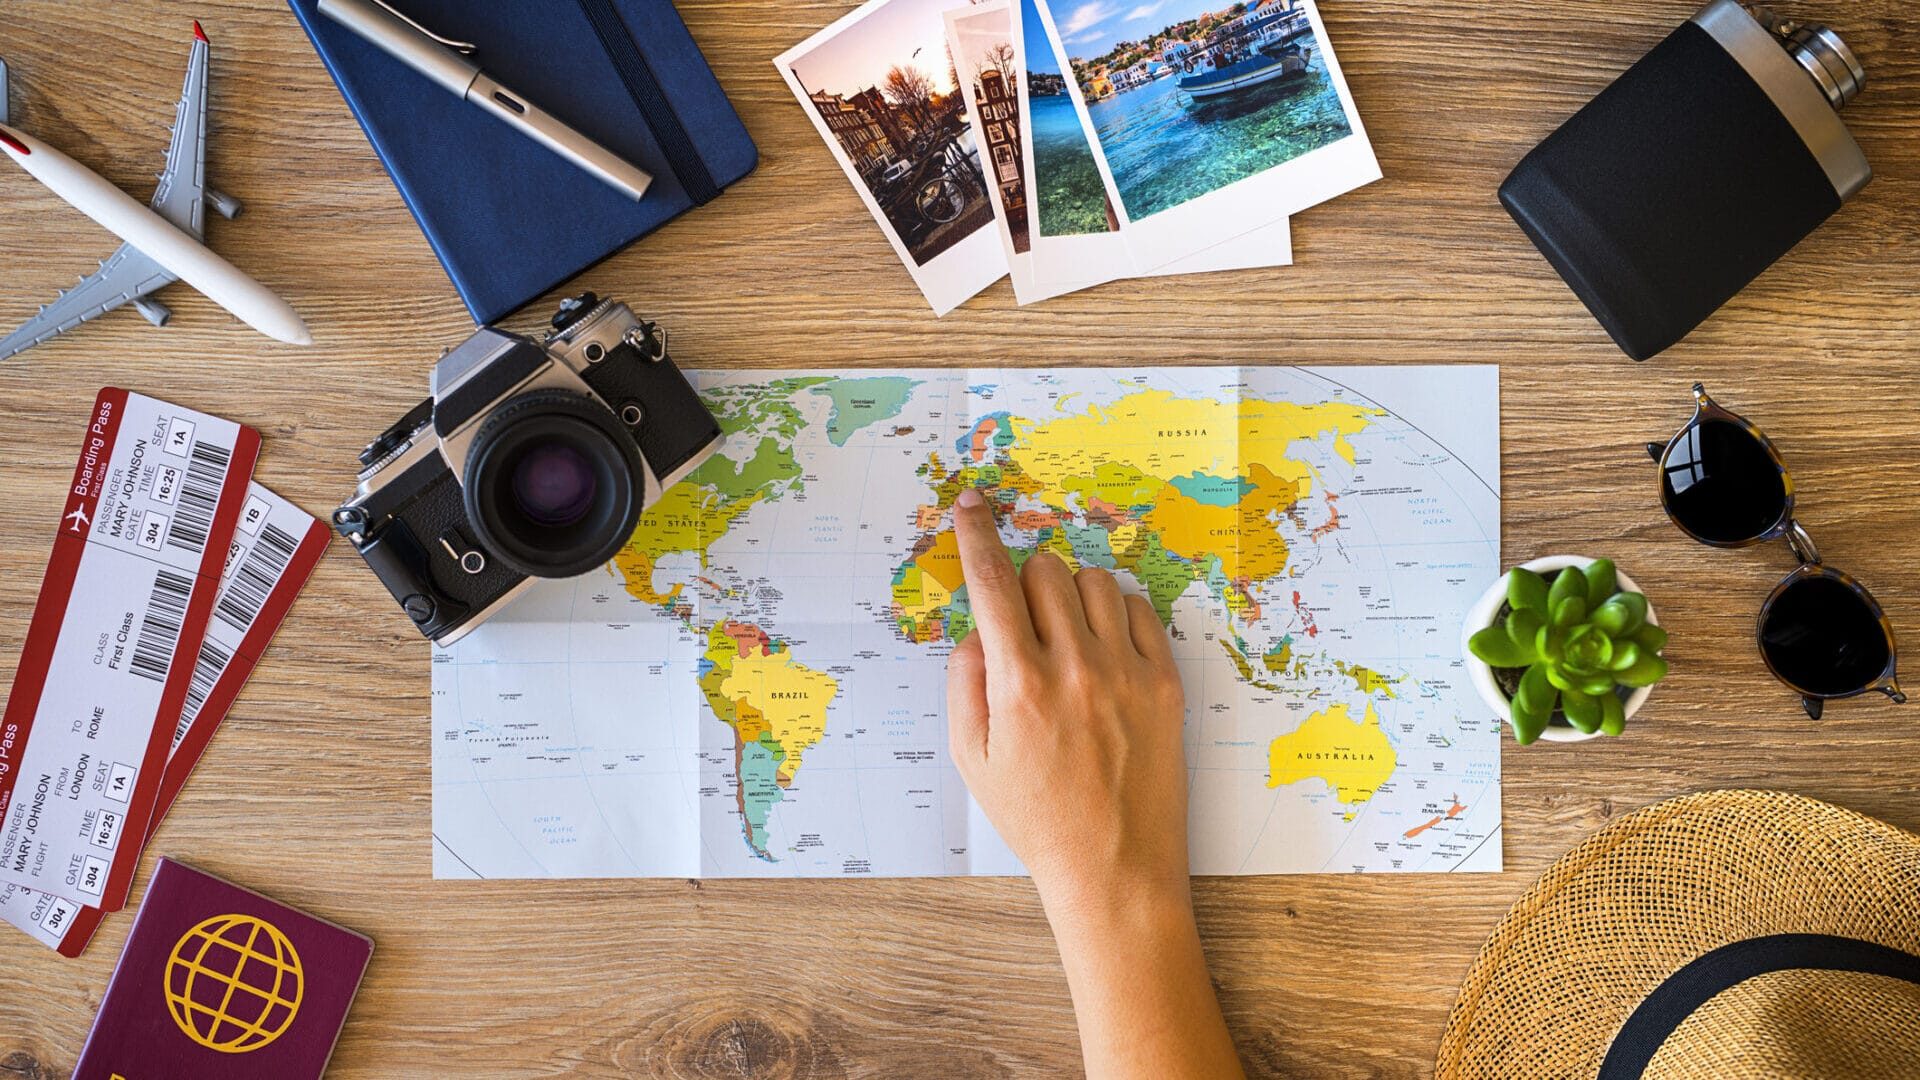 Planning a travel